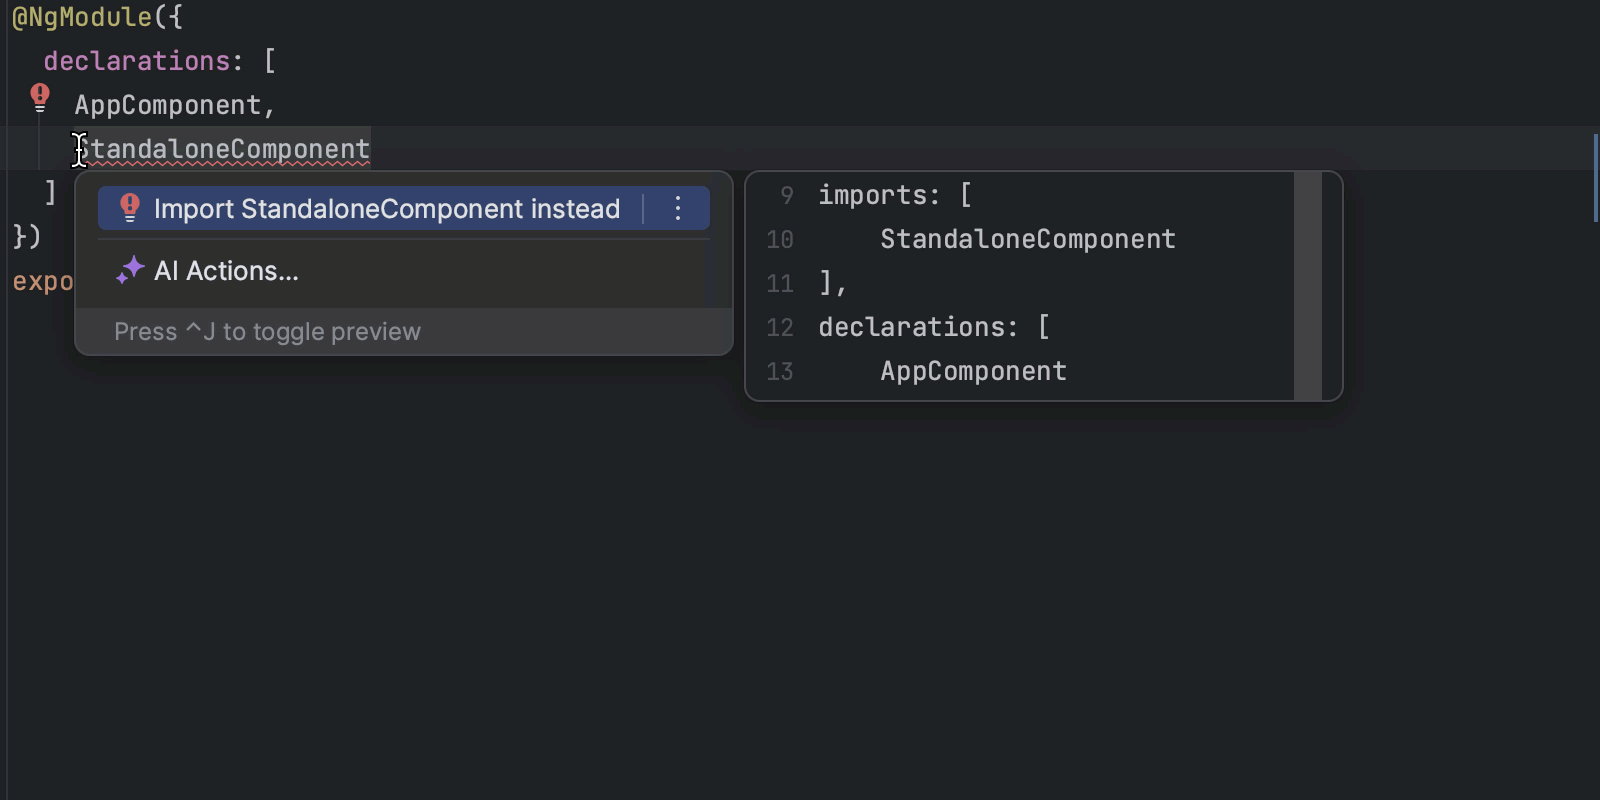 Using the import standalone components in NgModule